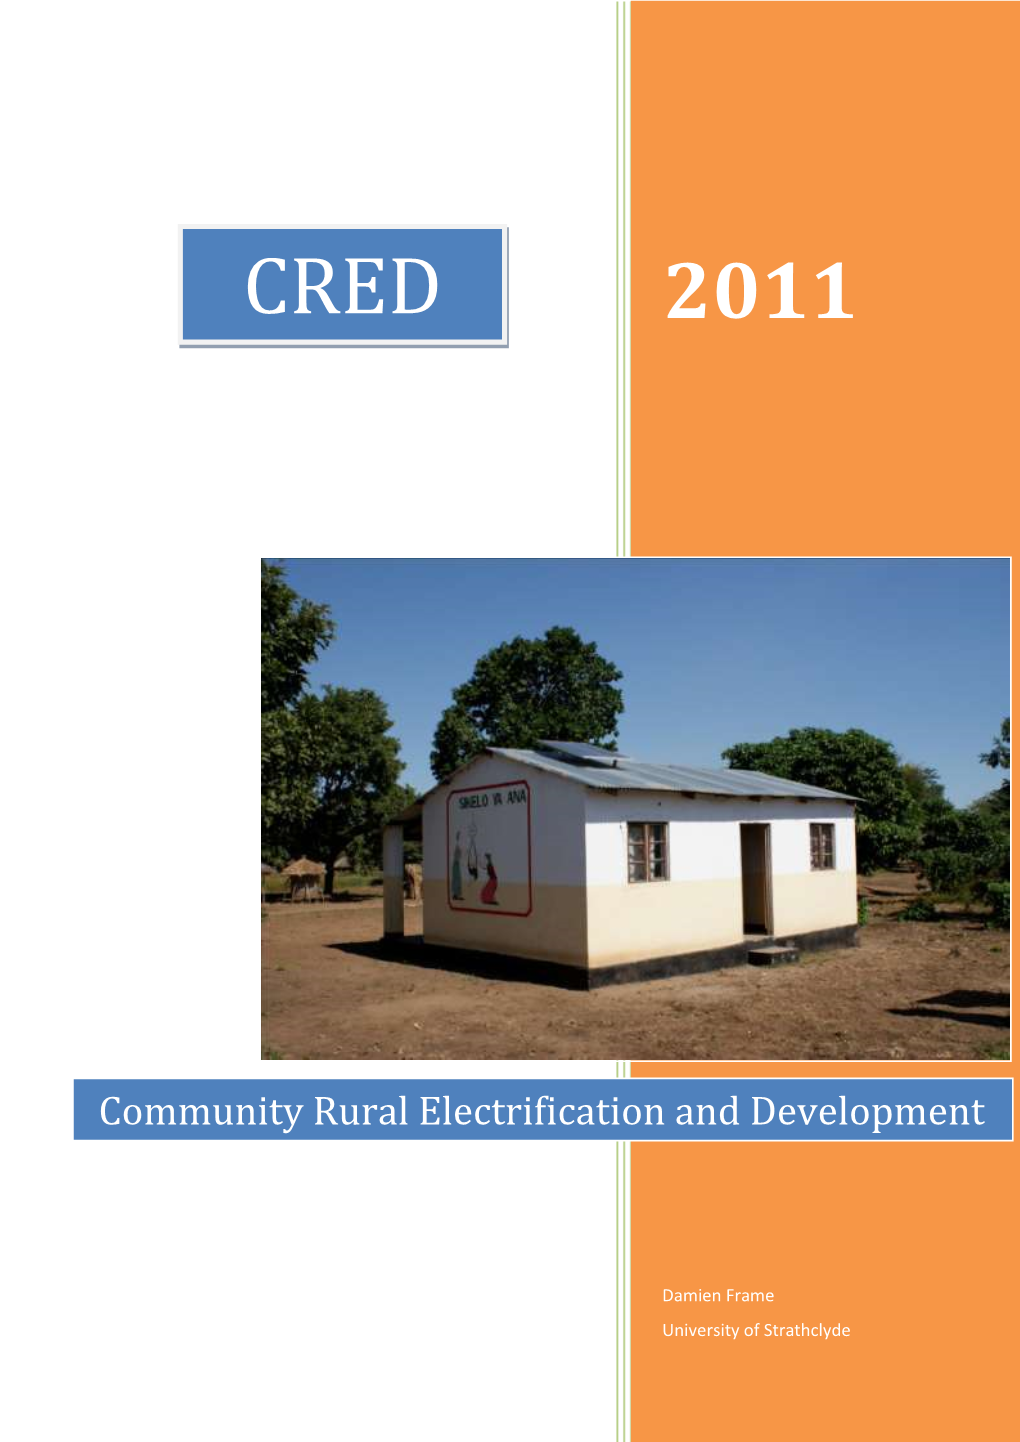 Community Rural Electrification and Development